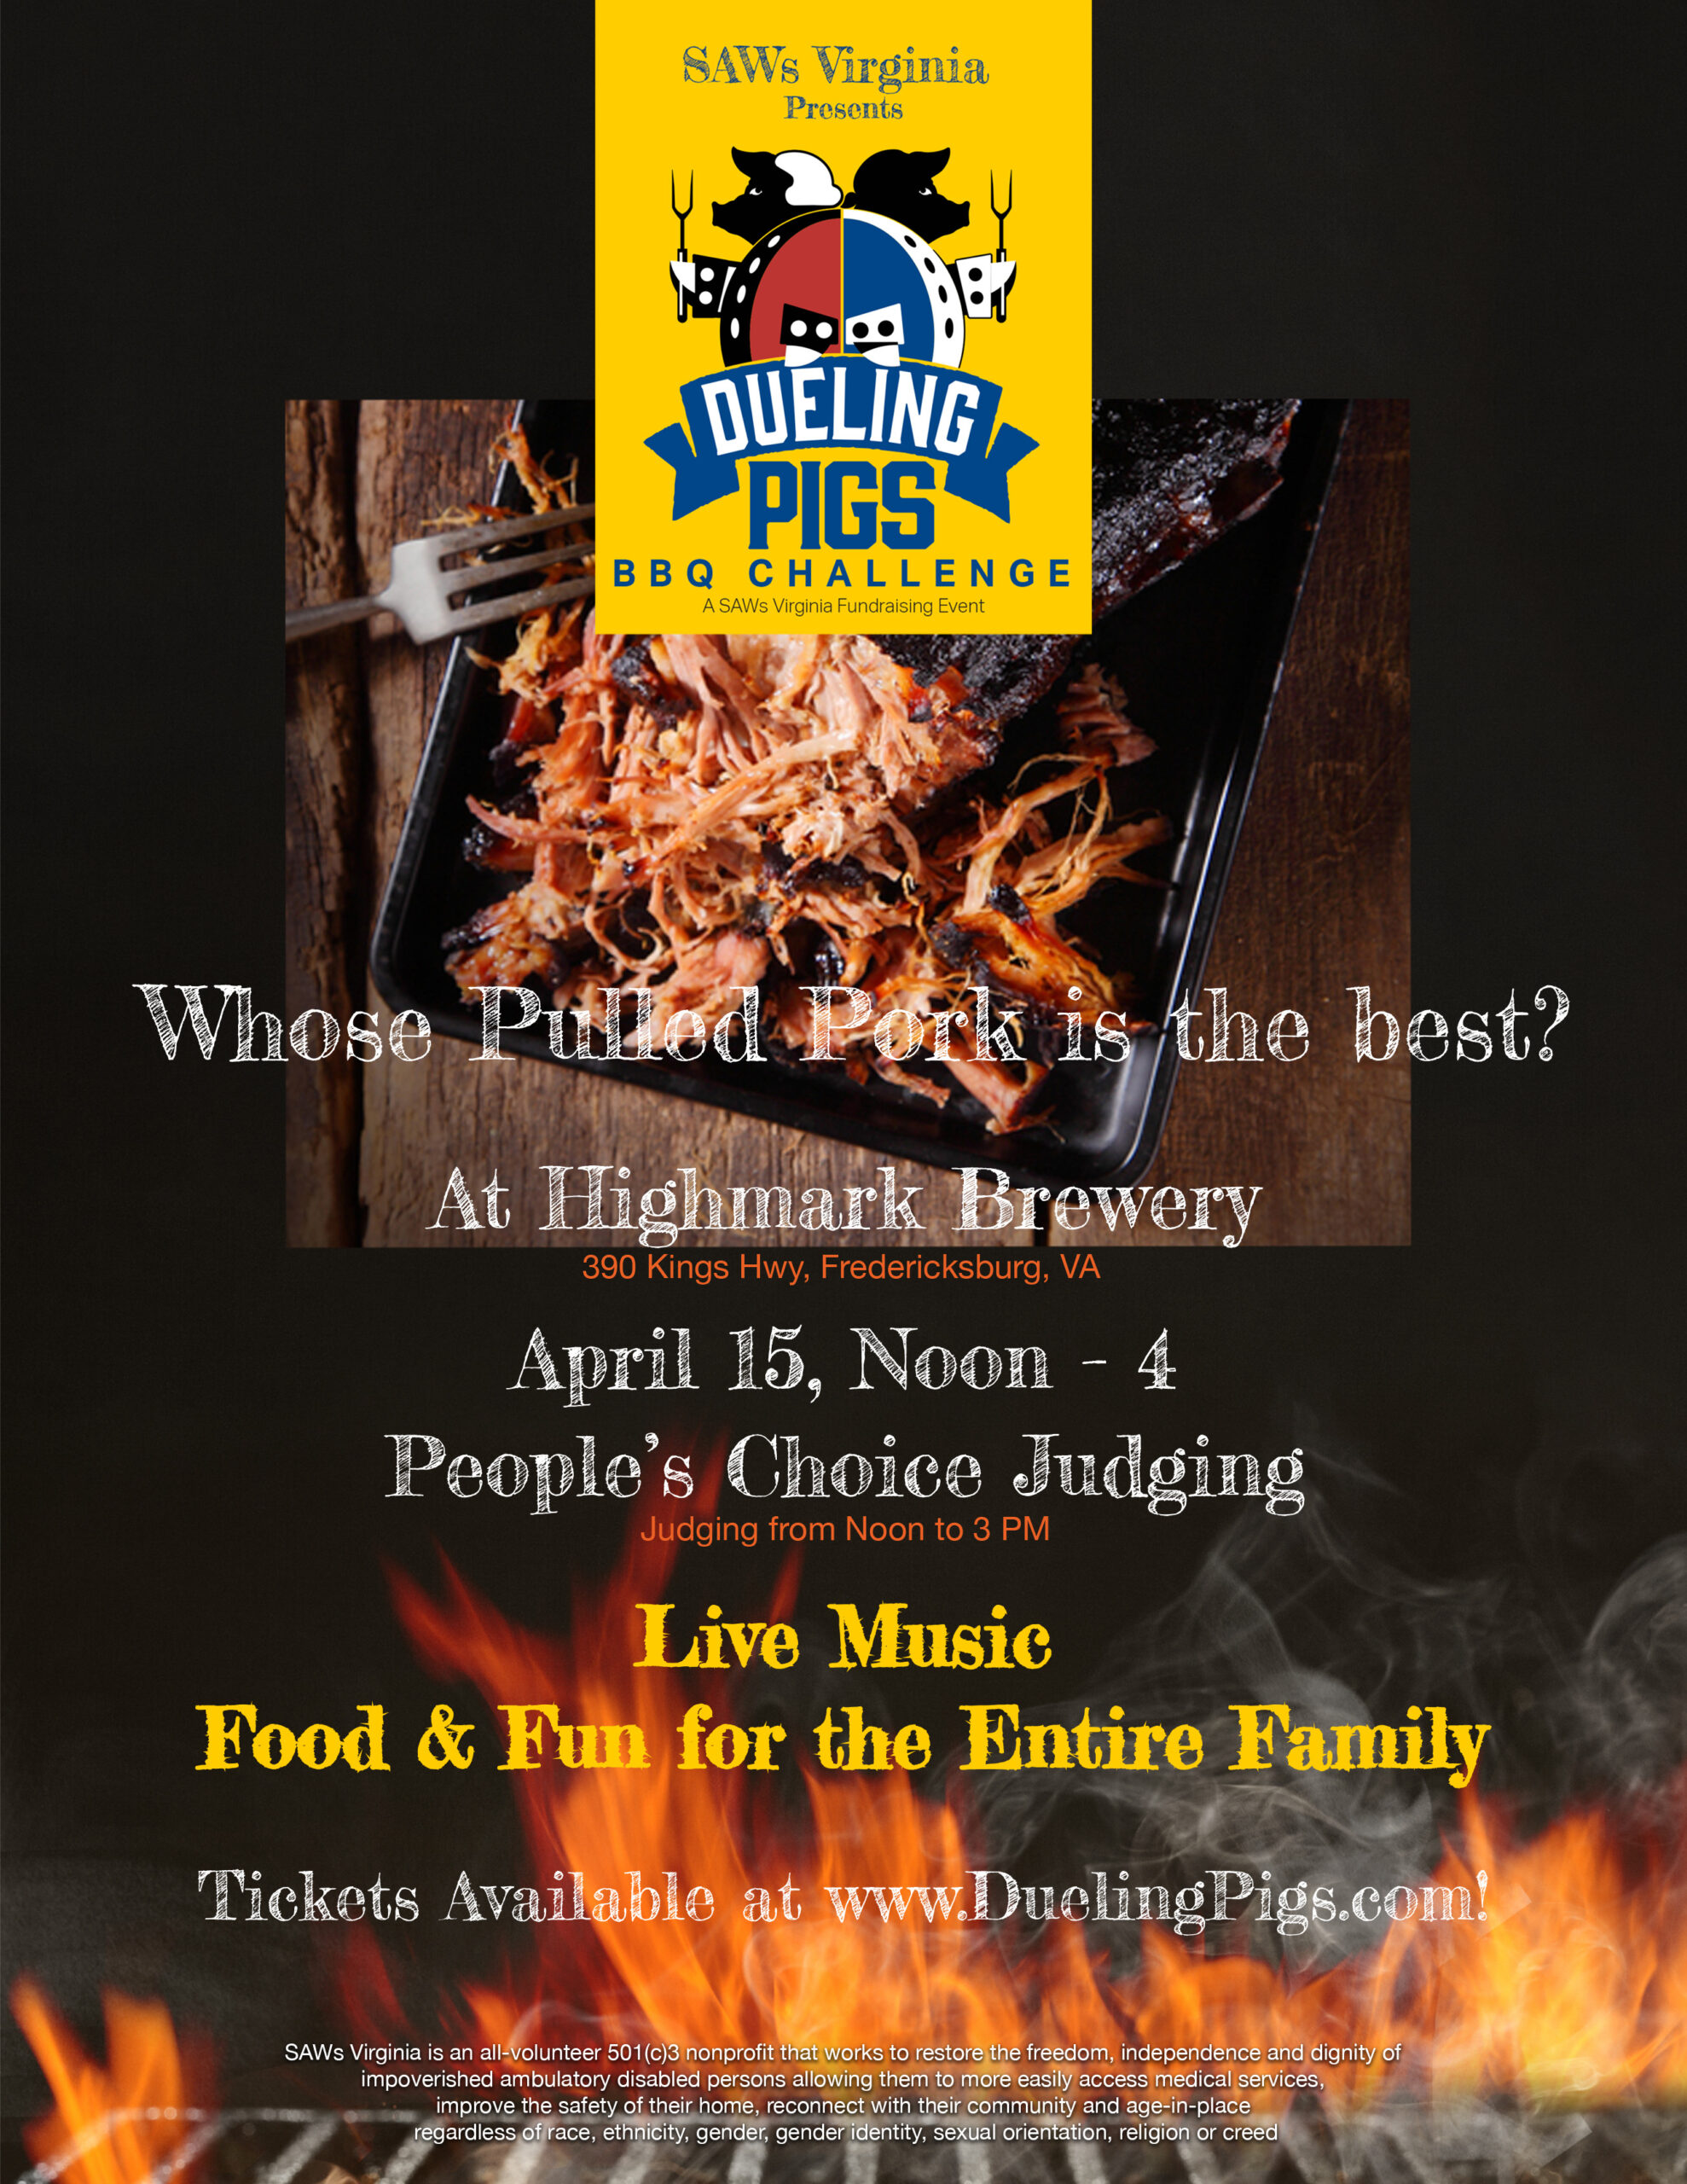 <h1 class="tribe-events-single-event-title">Dueling Pigs BBQ Challenge</h1>